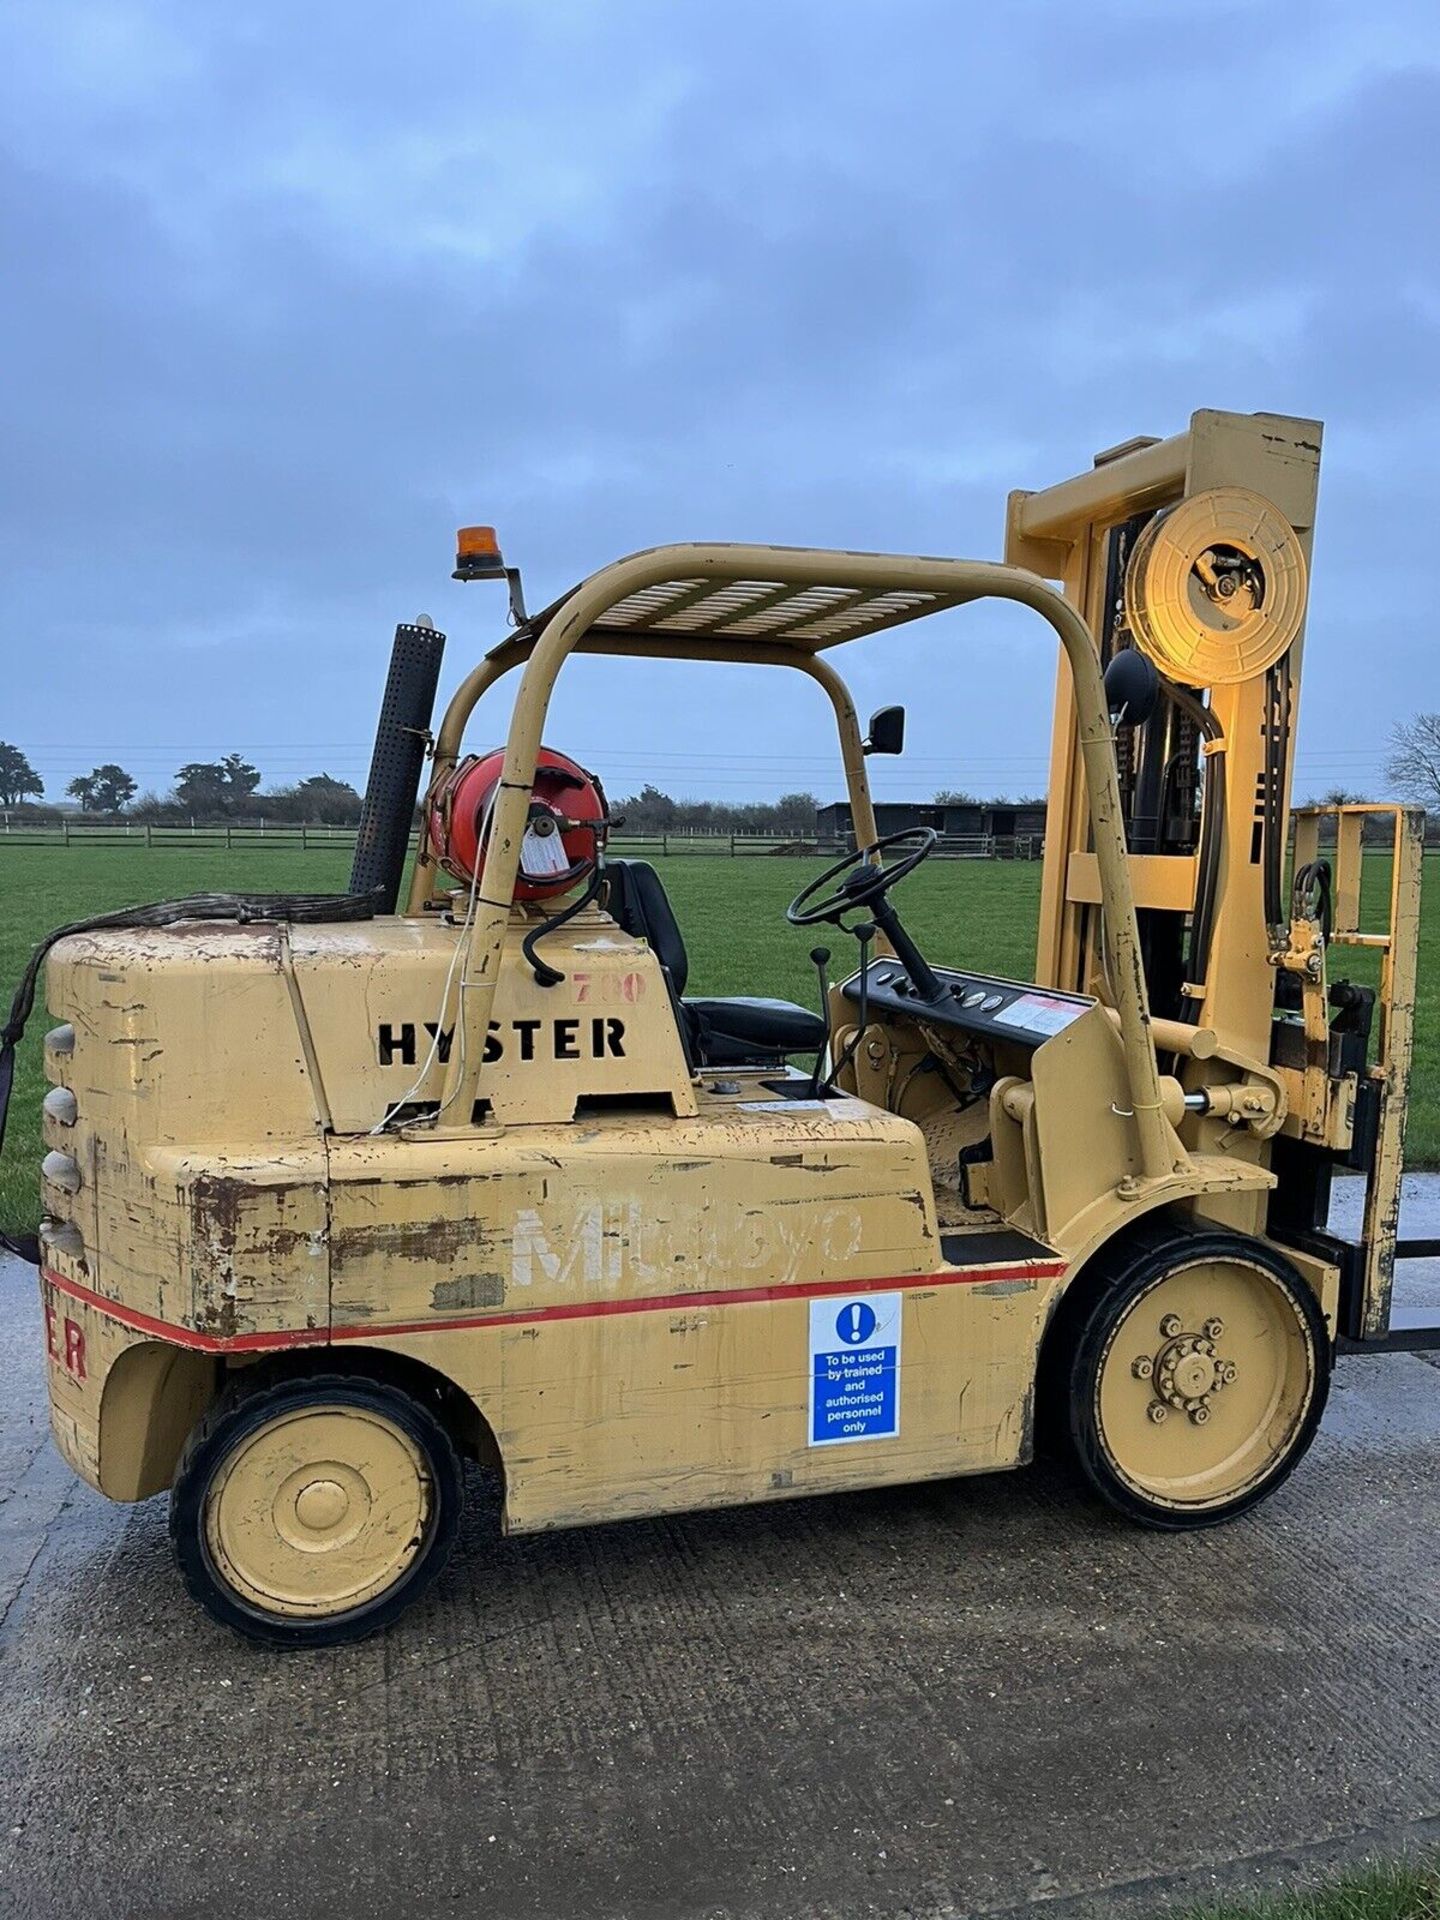 Hyster forklift truck - Image 2 of 8